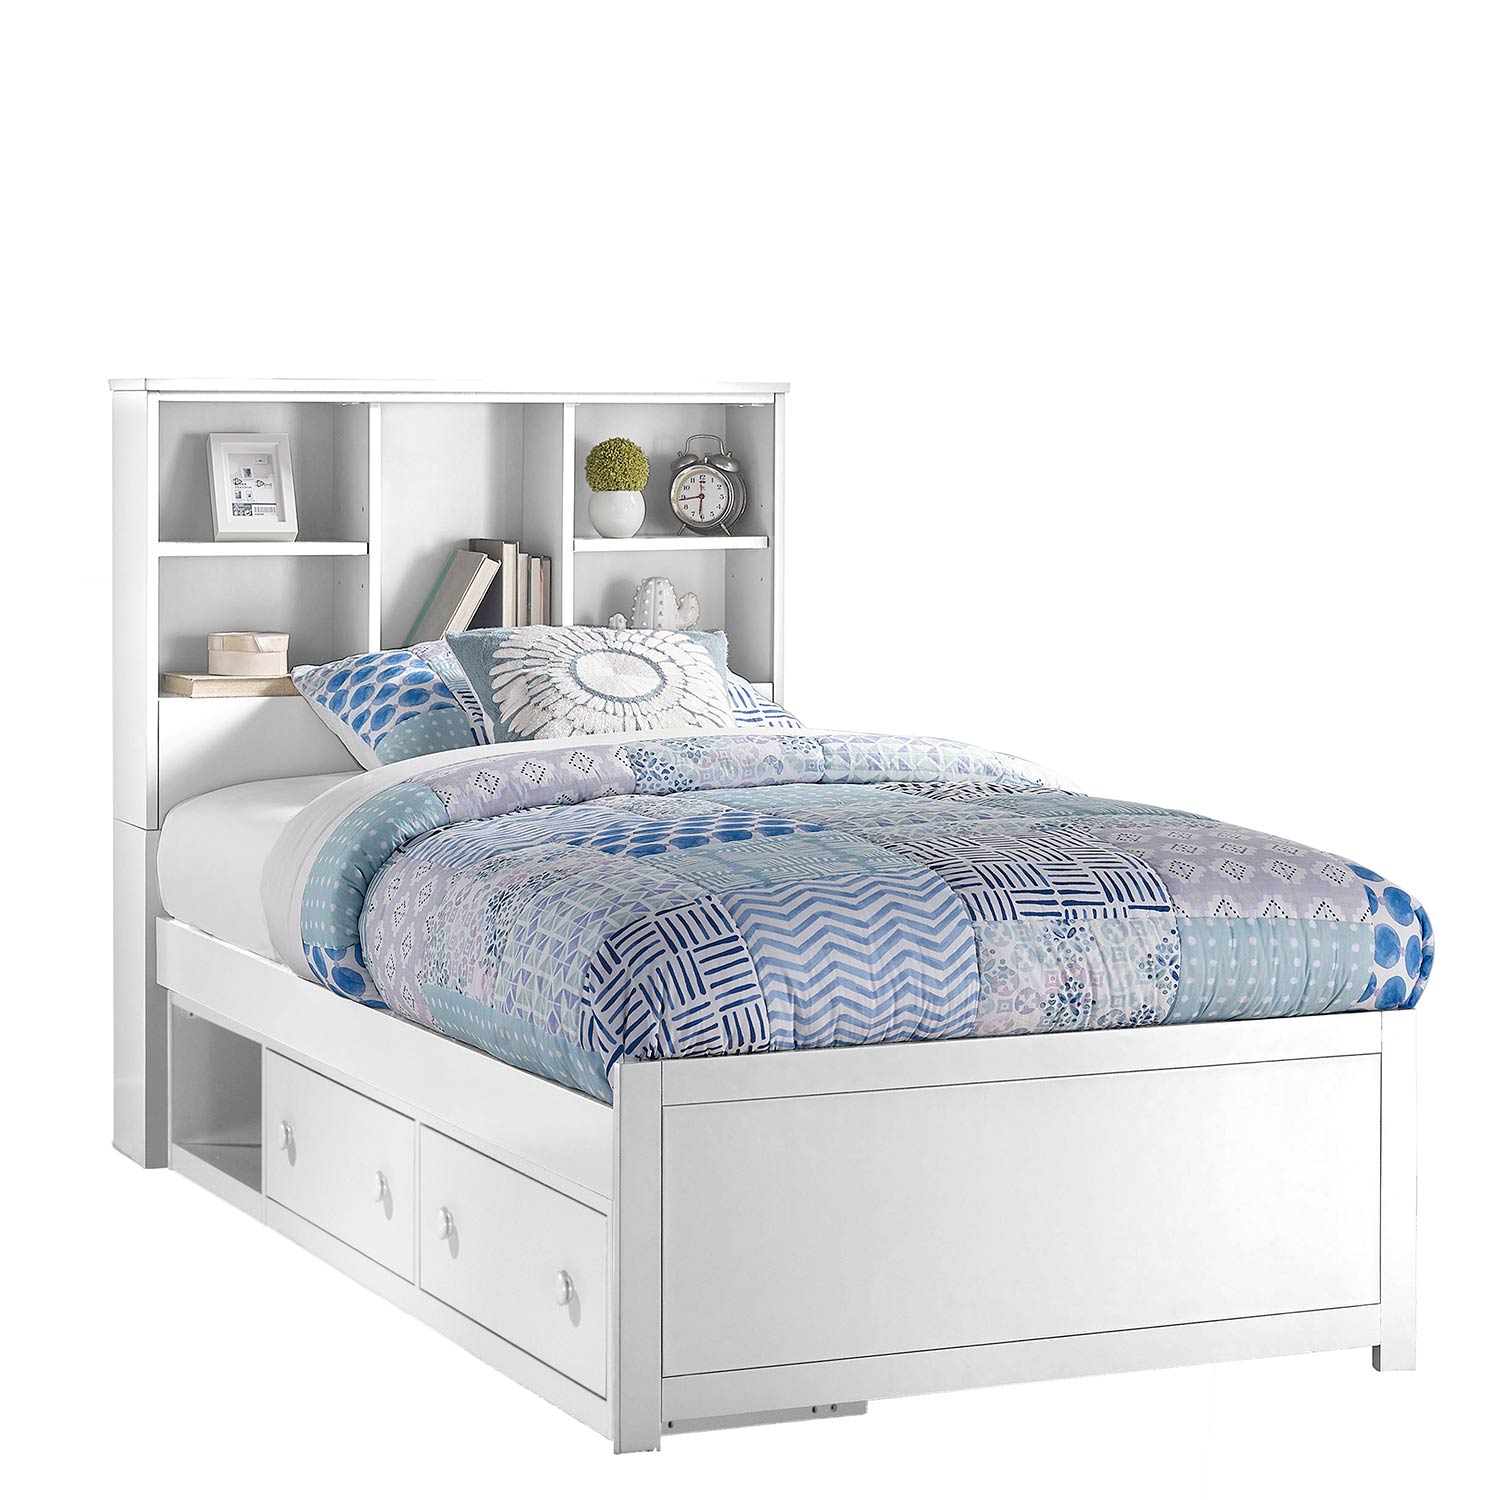 Hillsdale Caspian Twin Bookcase Bed with Storage Unit - White